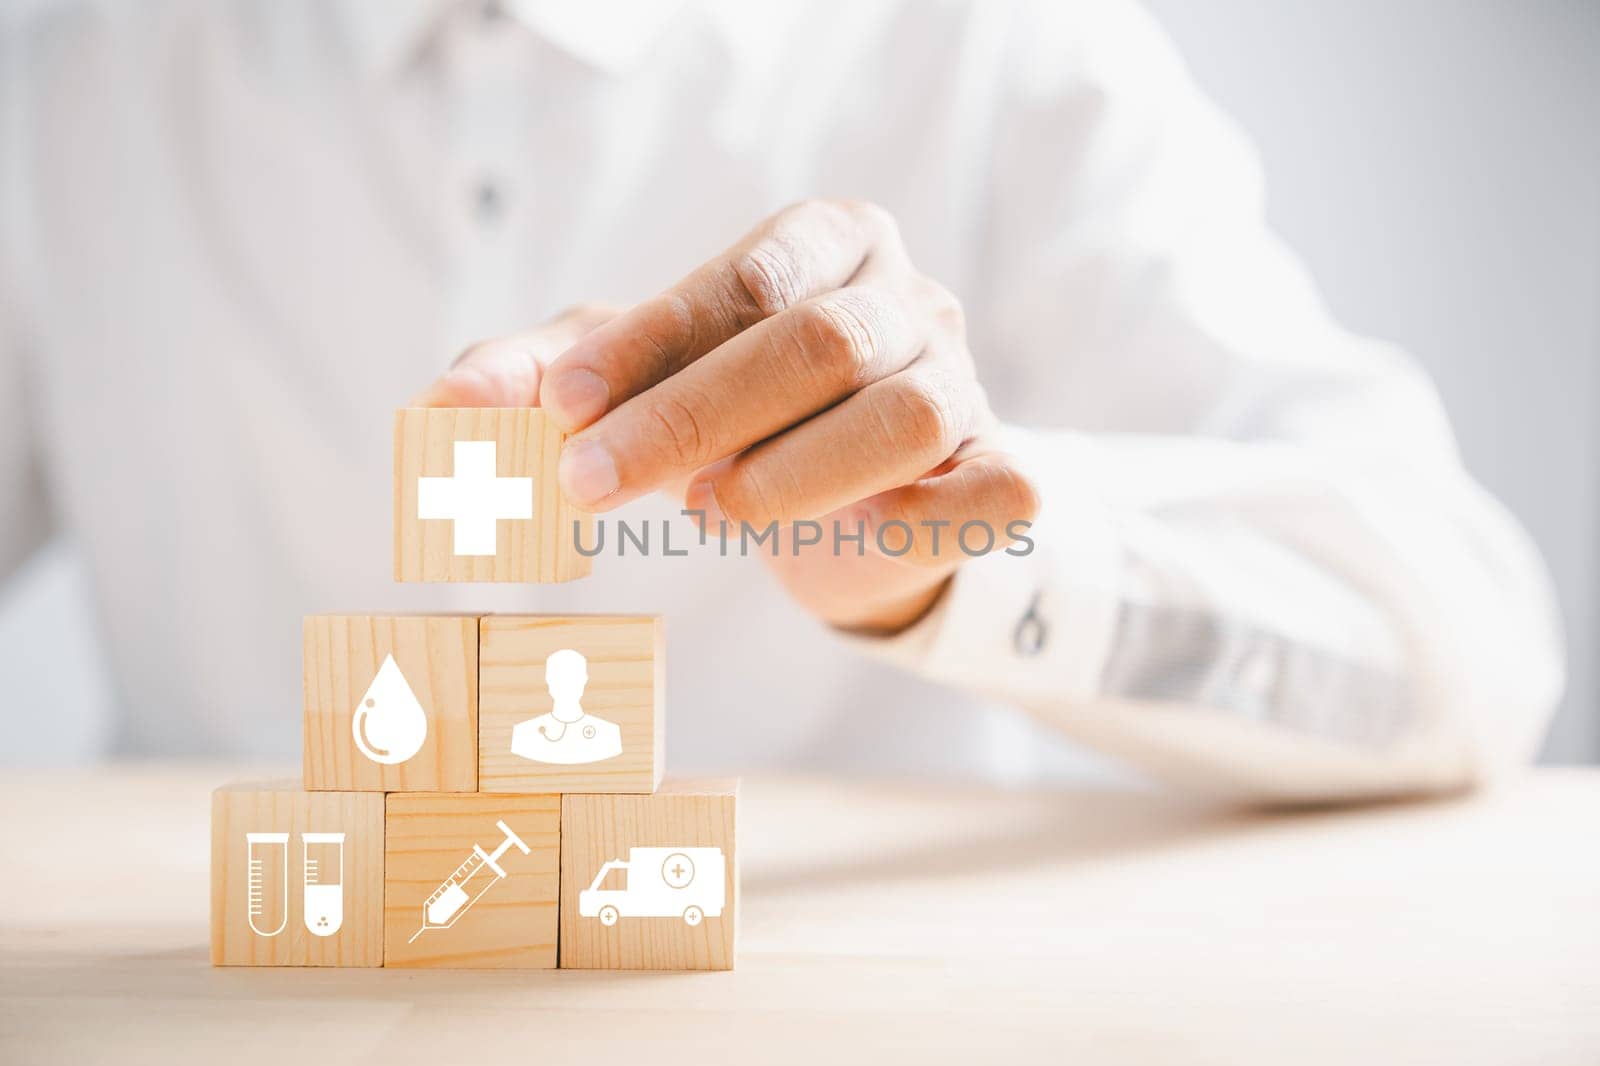 Grasped wooden block, featuring healthcare and medical icons. Portraying safety, health, and family well-being. Symbolic of pharmacy, heart care, and happiness. health care concept